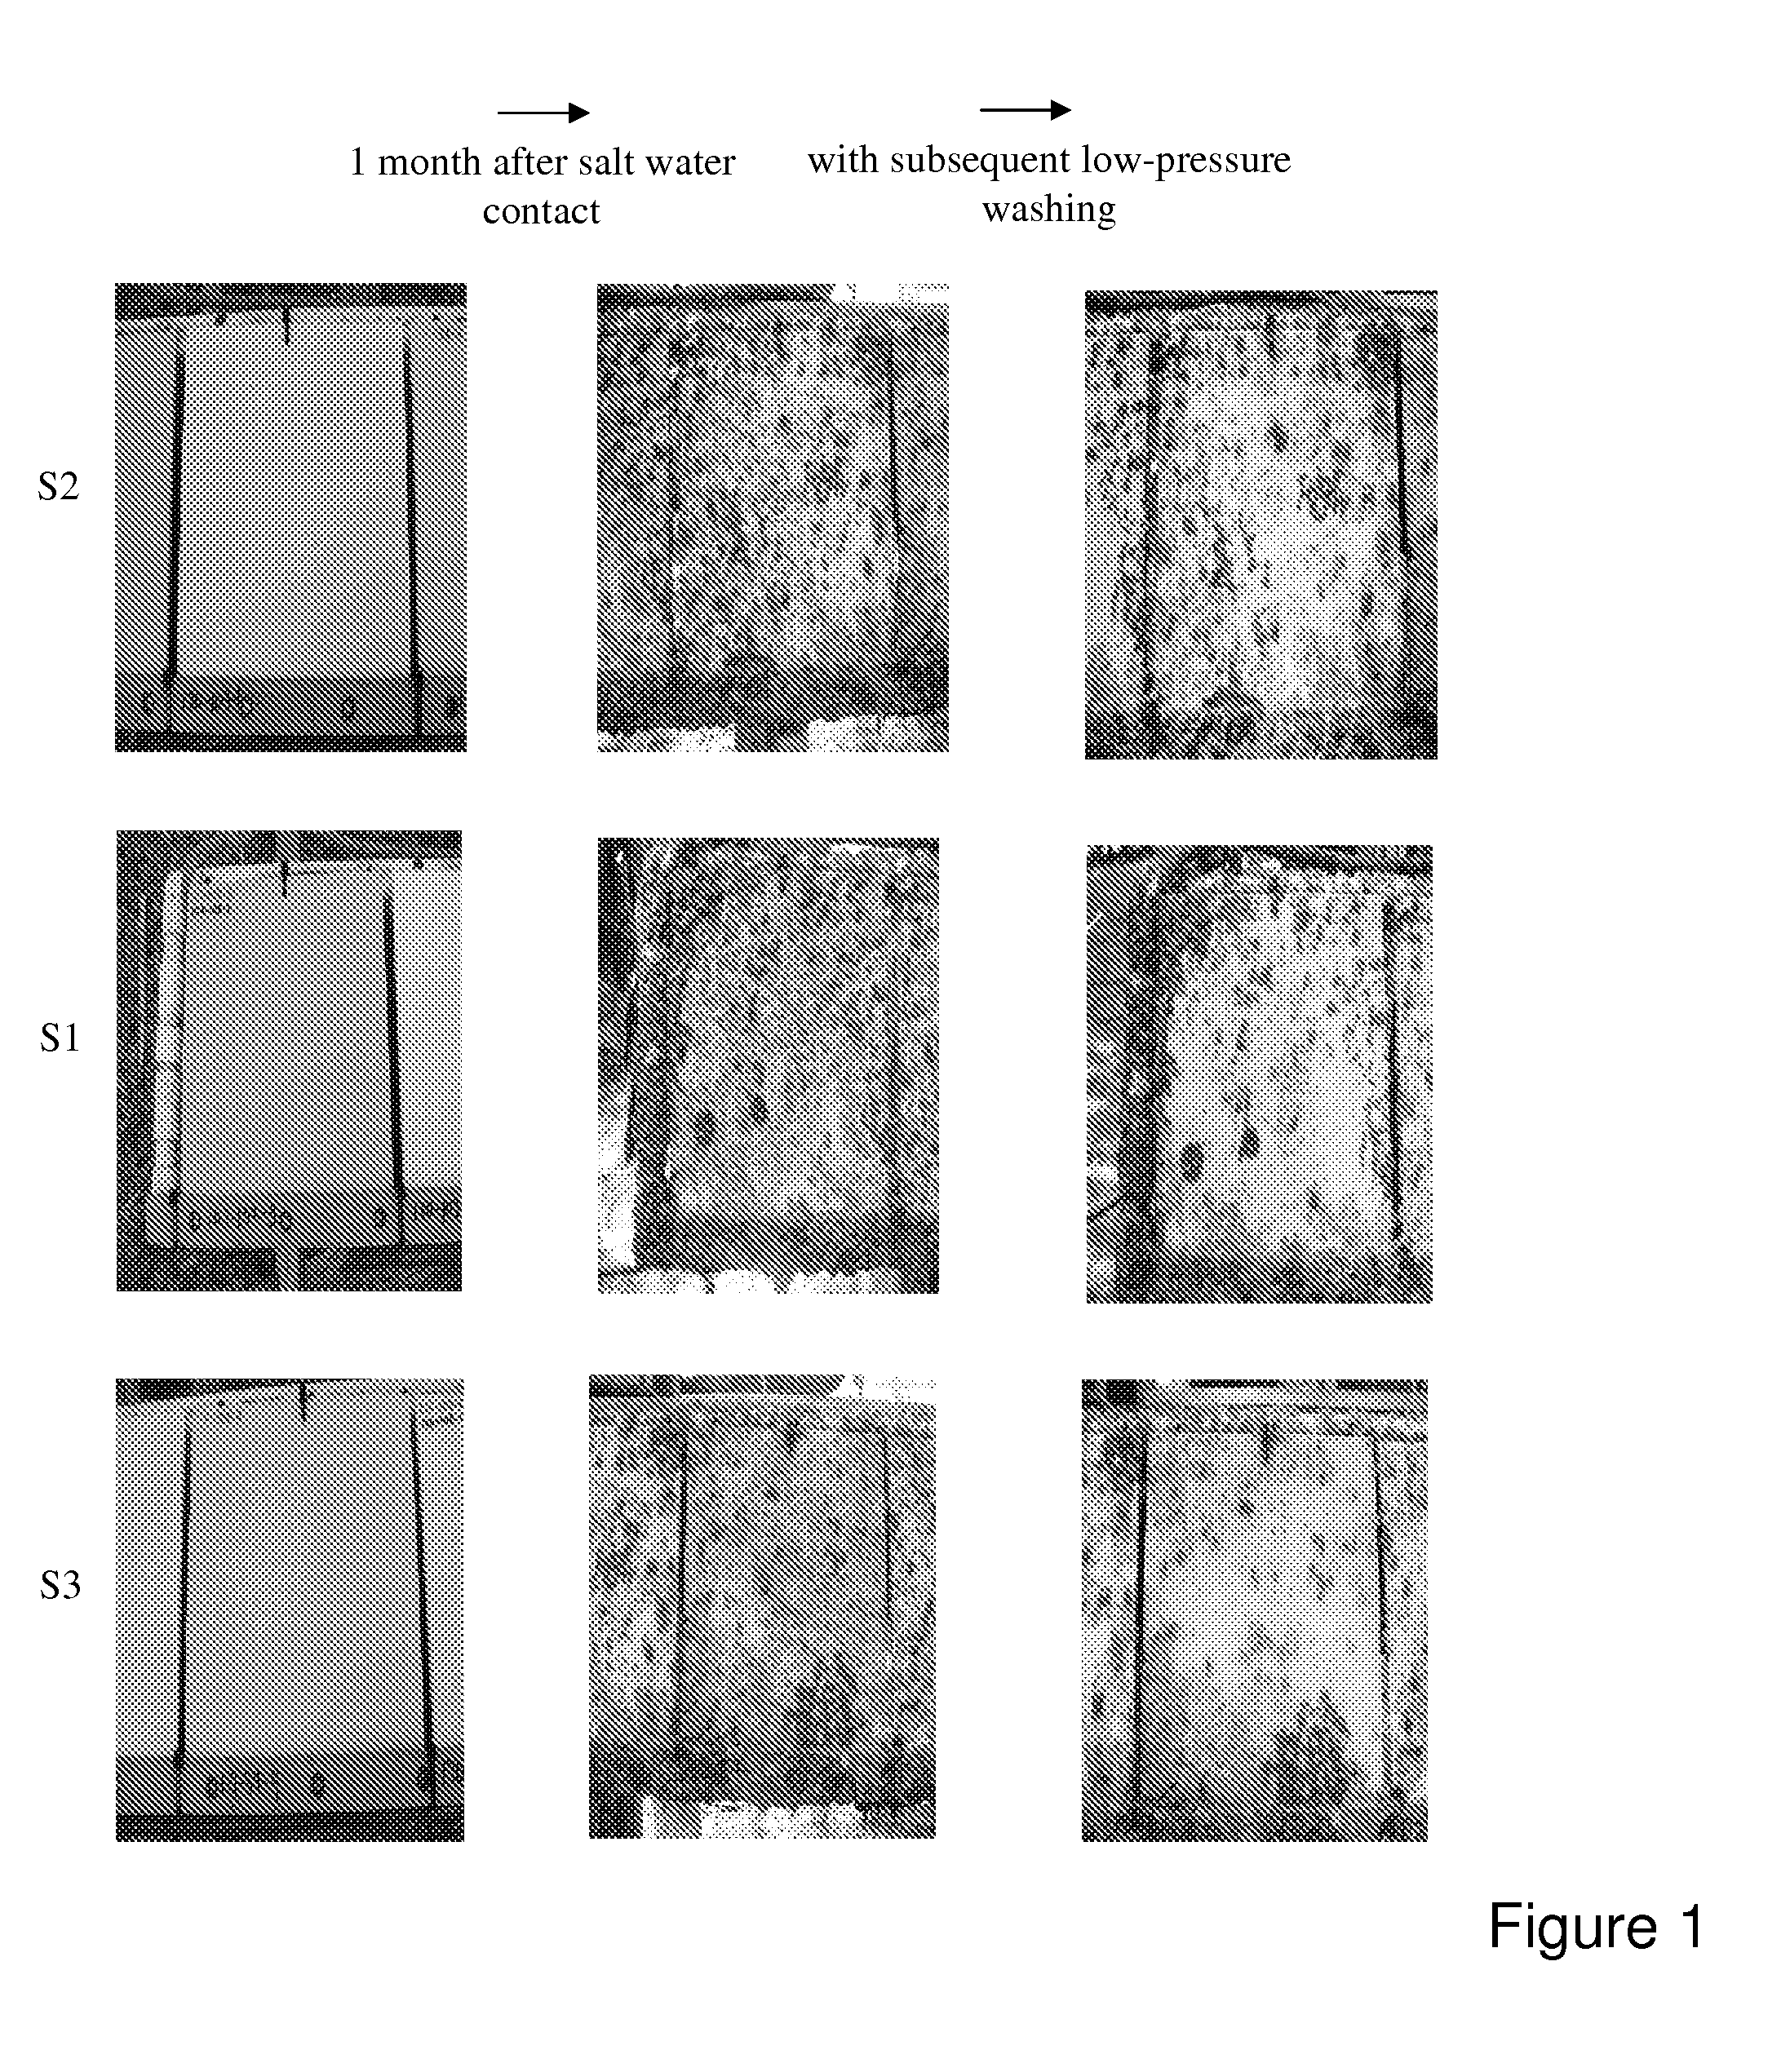 Anti-fouling ultrahigh molecular weight polyethylene compositions and methods of using the same